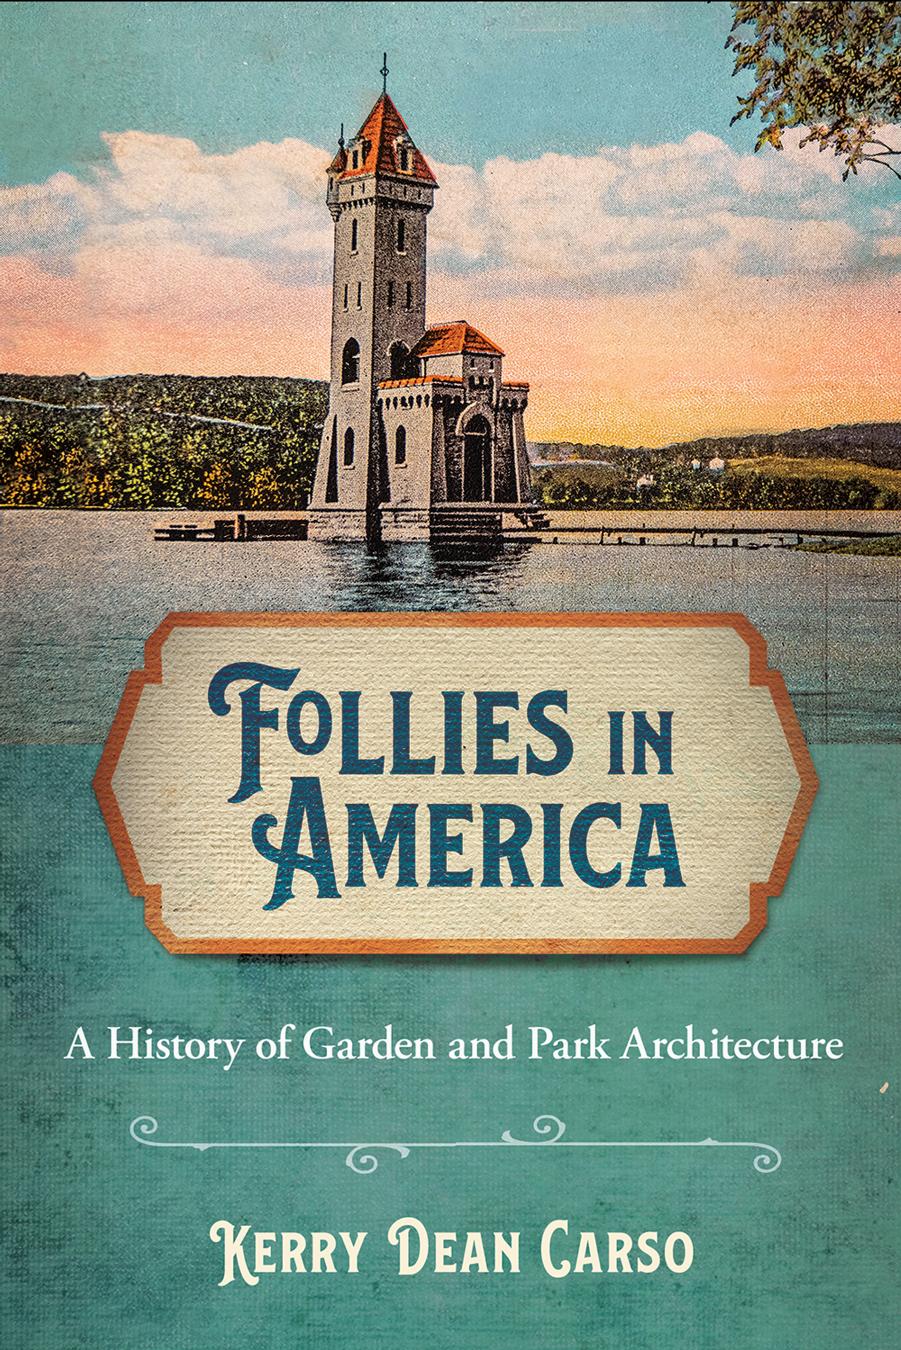 Follies in America: A History of Garden and Park Architecture by Kerry Dean Carso